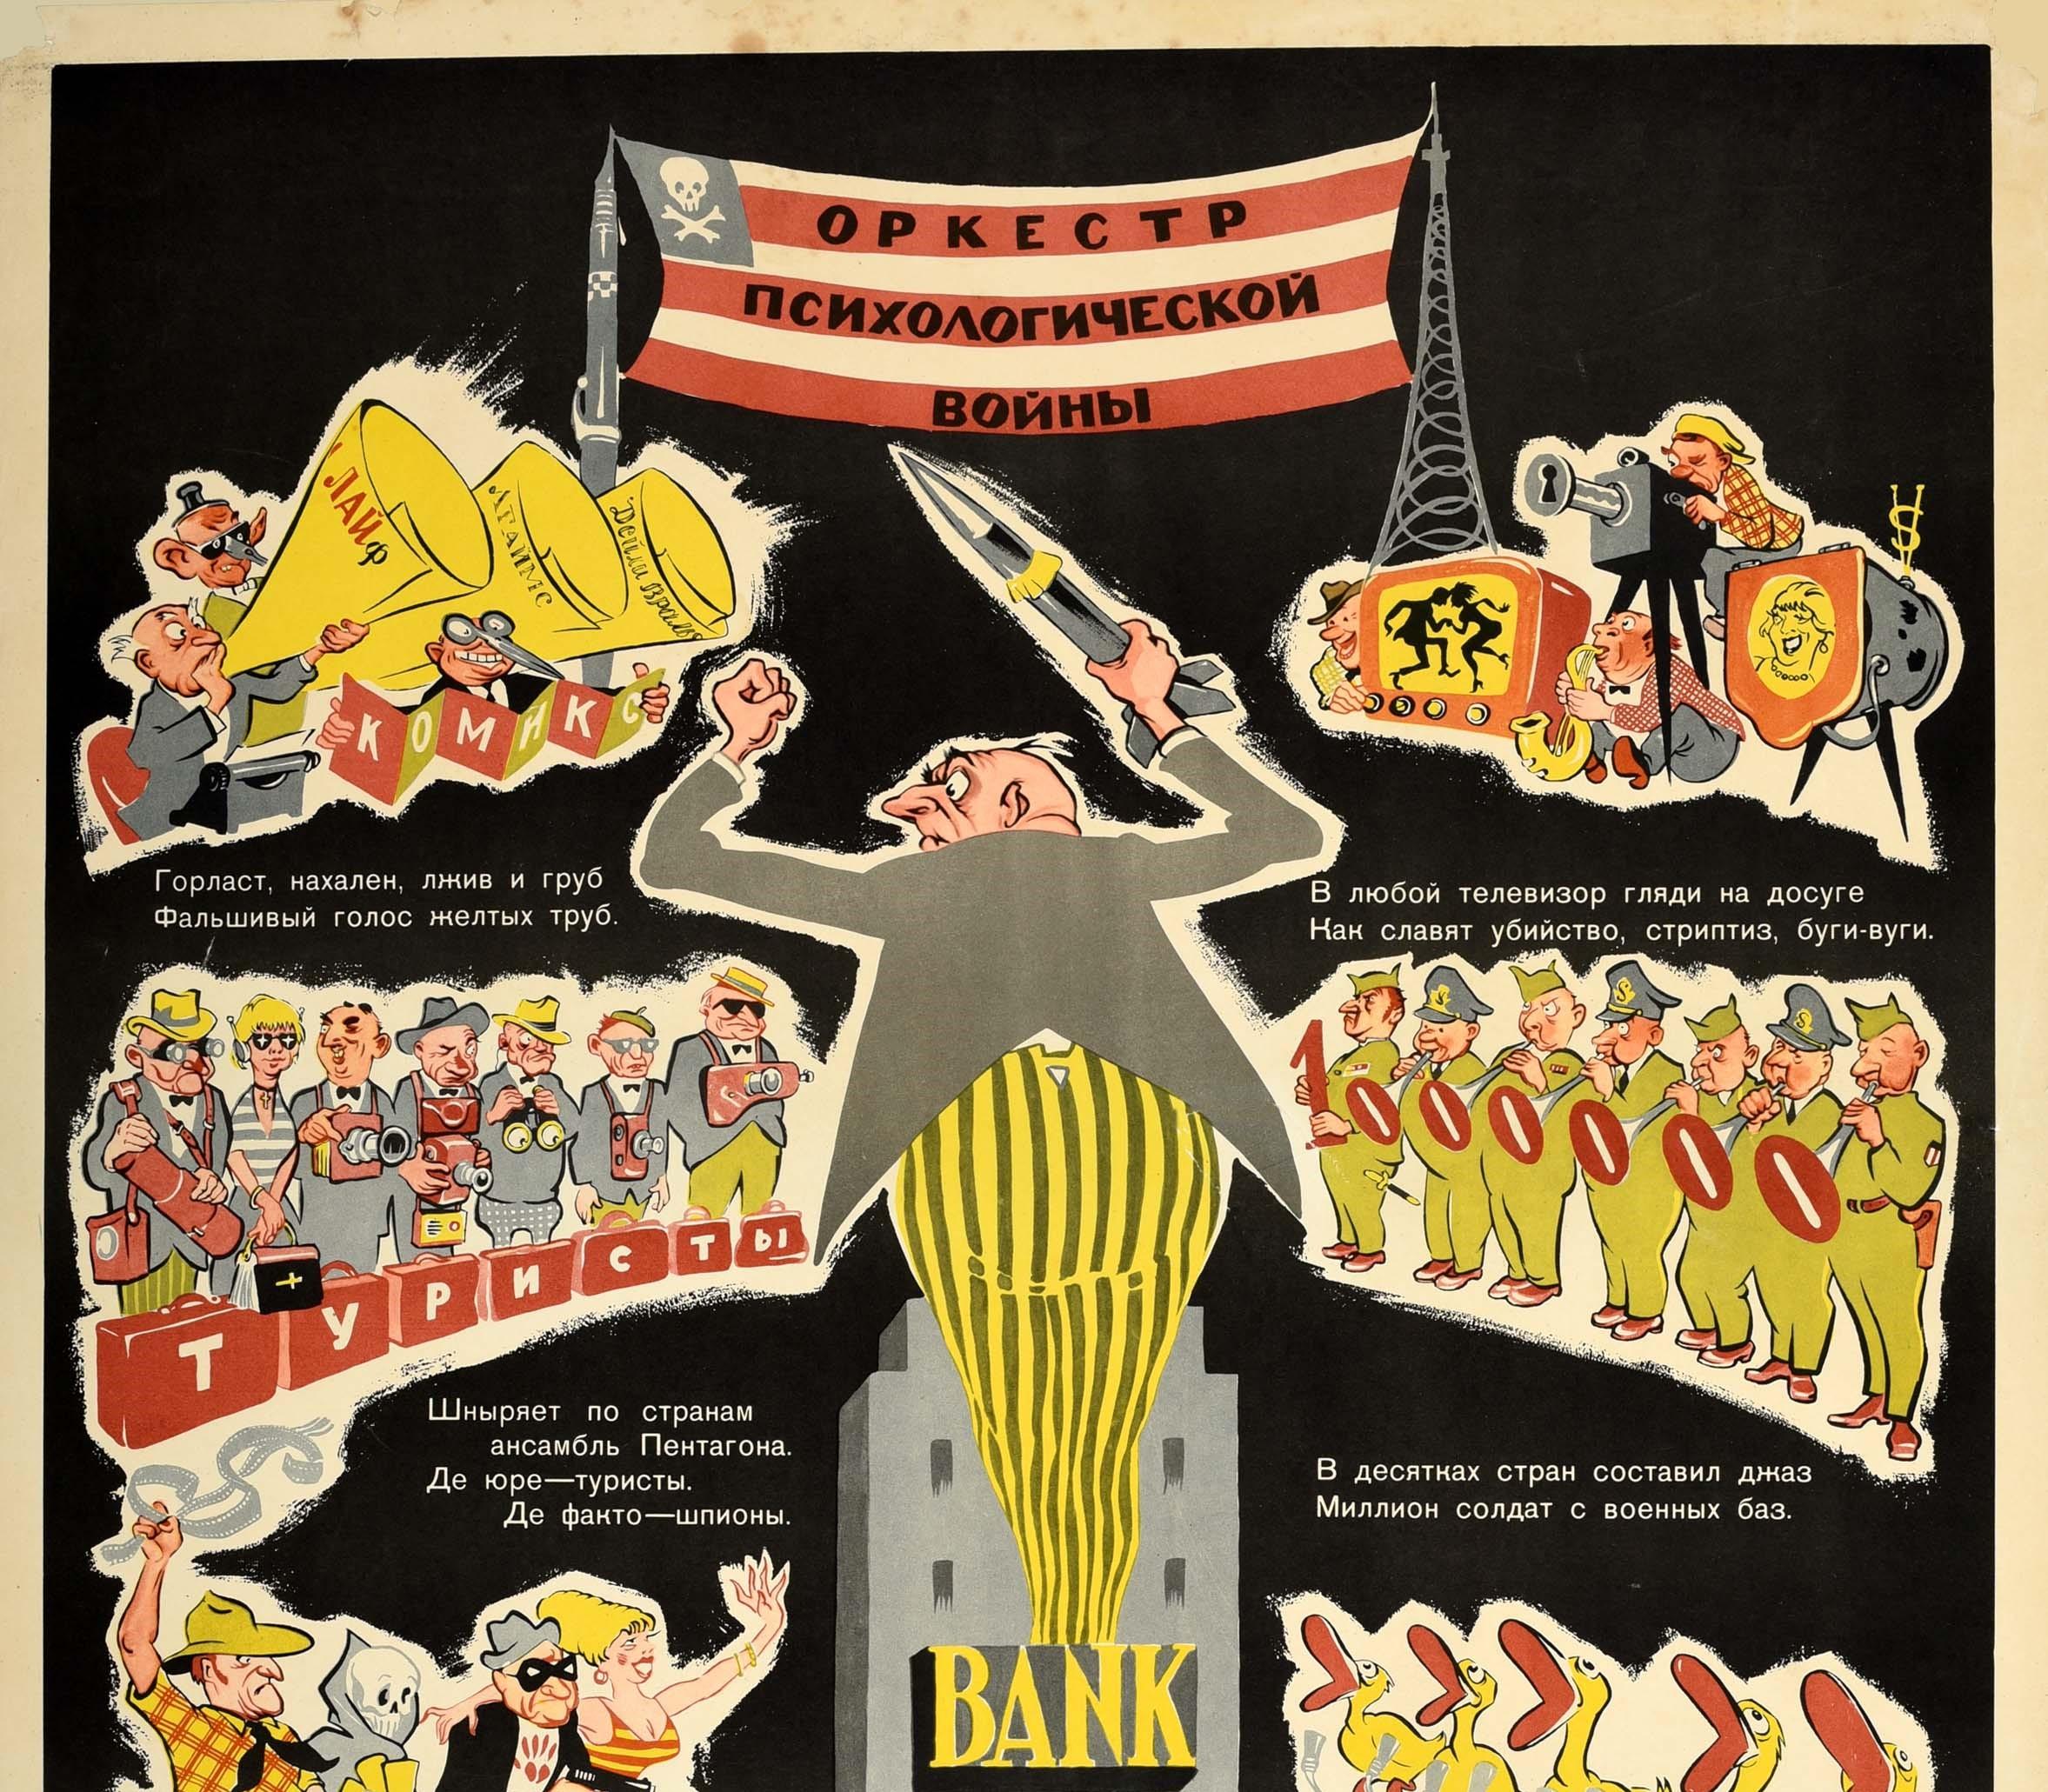 Original vintage Soviet anti-USA propaganda poster featuring the title text on a flag of America with red and white stripes and a skull and crossbones emblem instead of stars - Psychological War Orchestra / ??????? ??????????????? ????? - and a